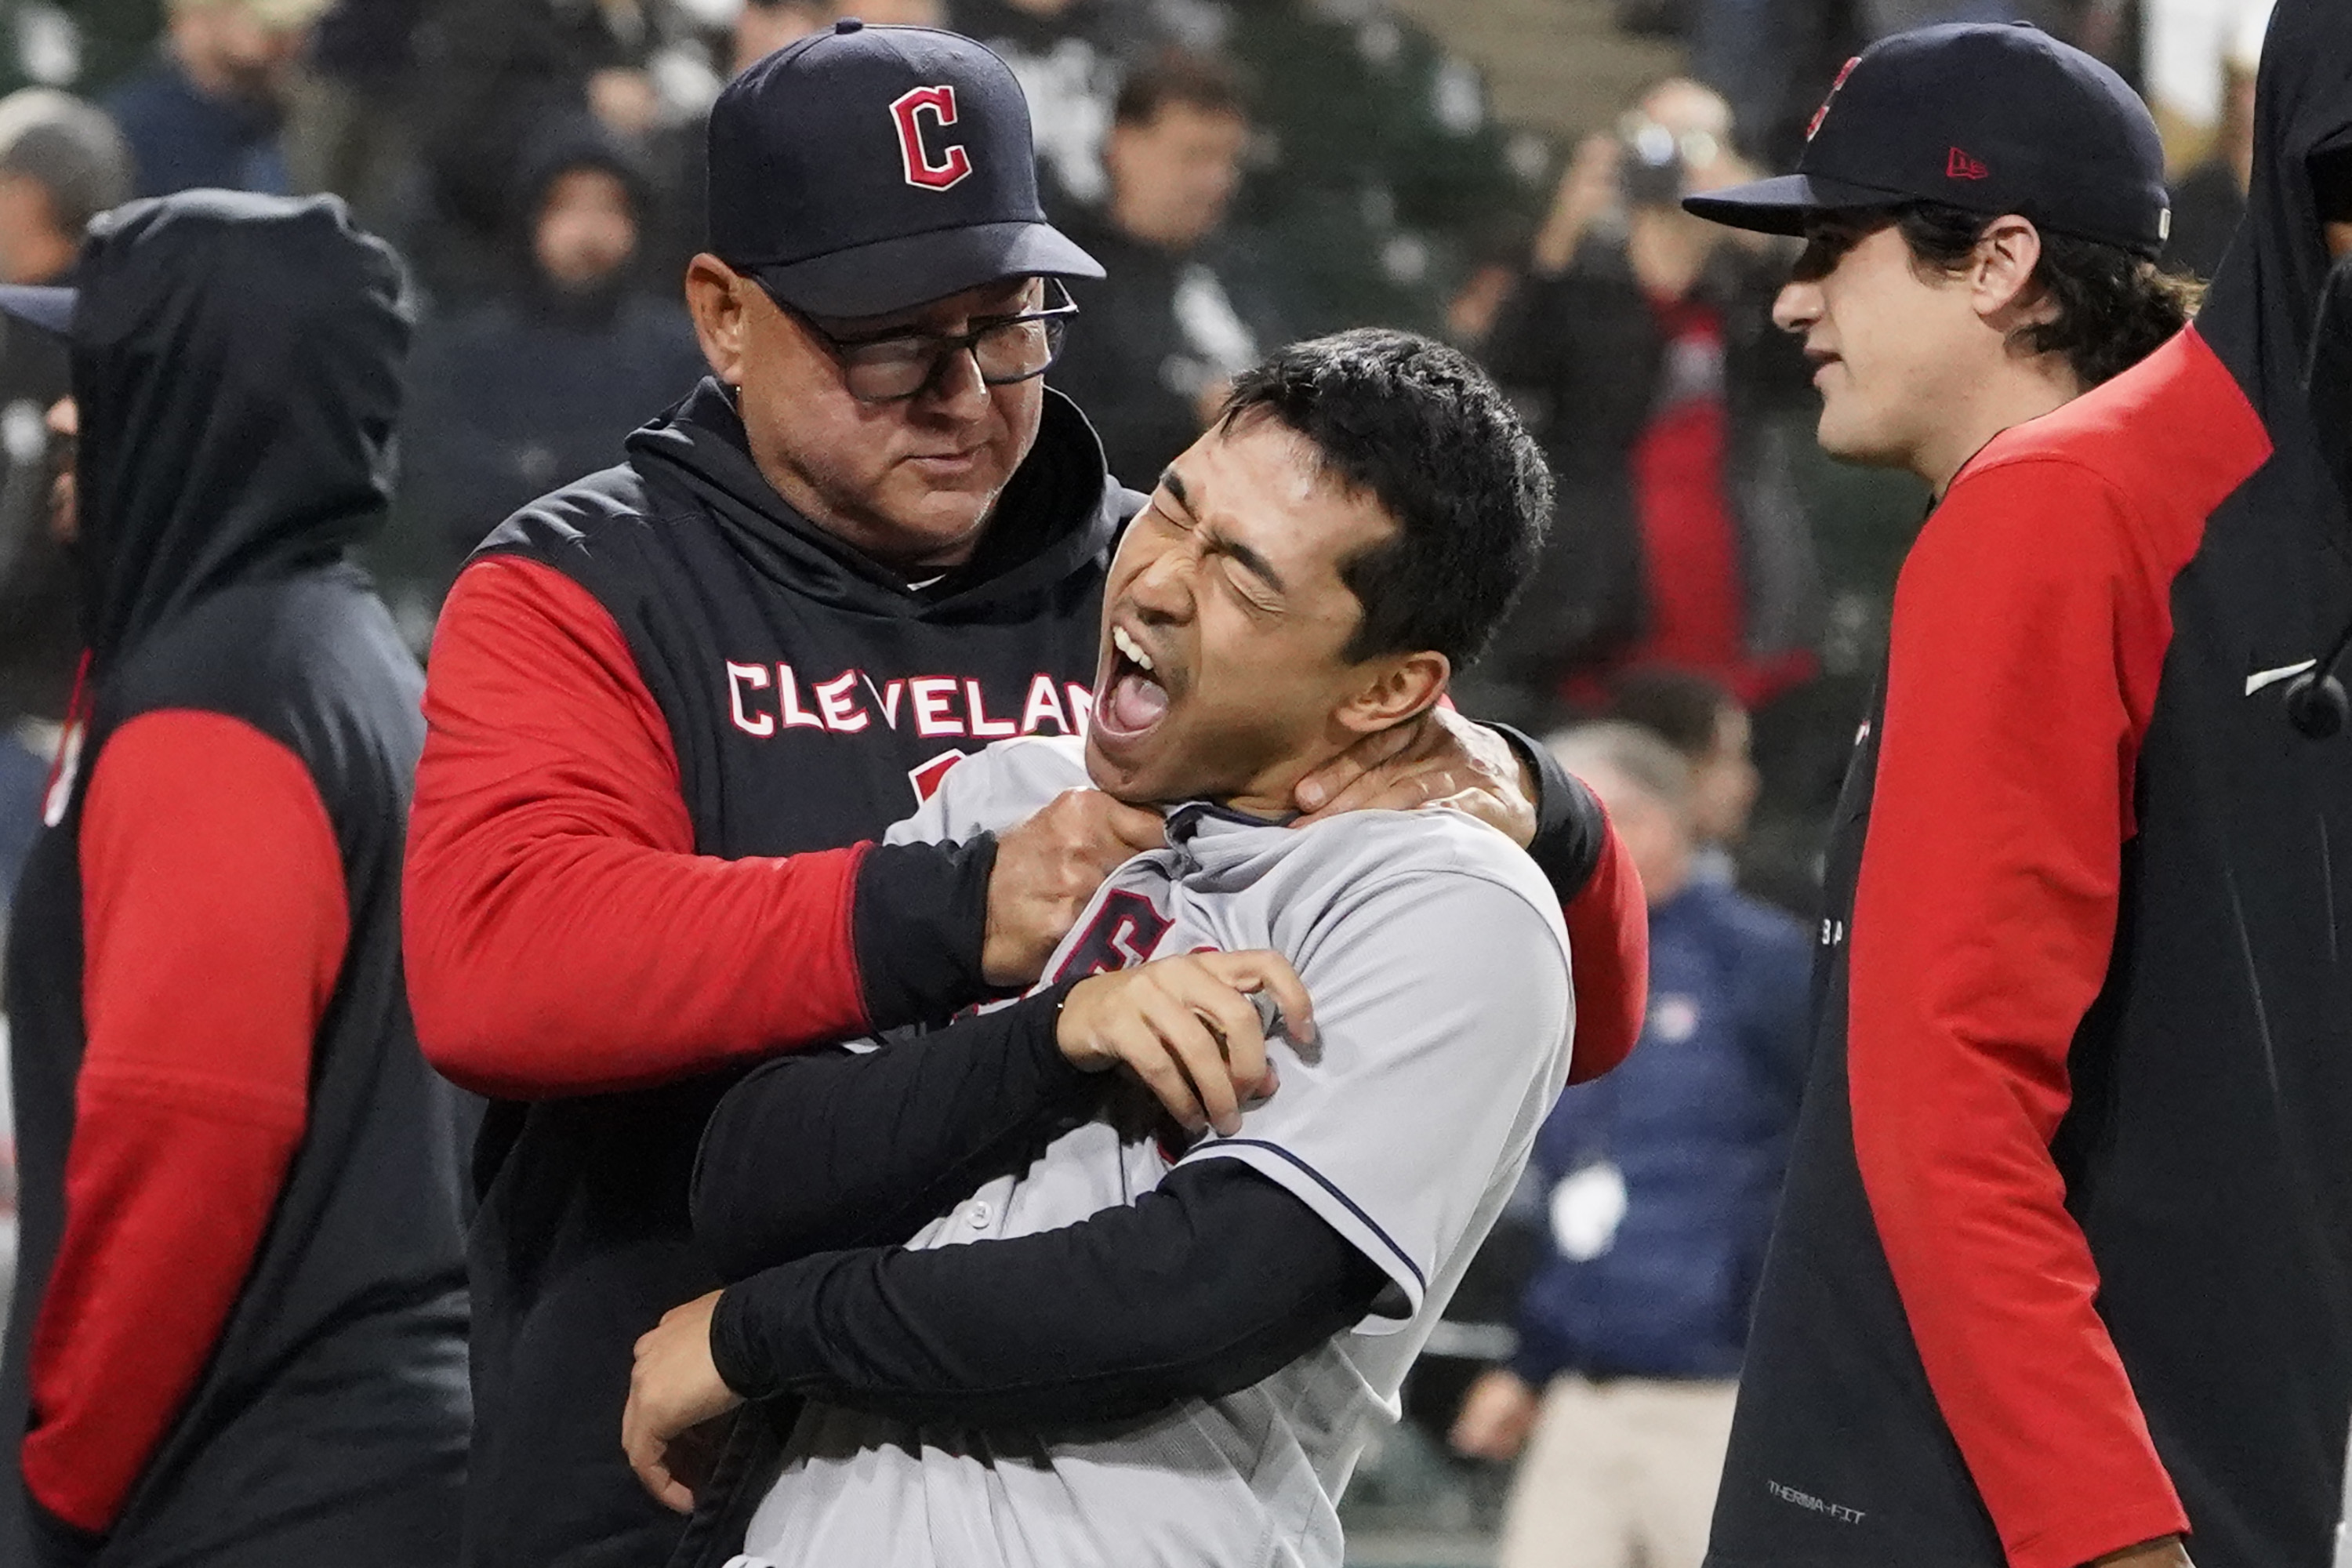 Guardians' Terry Francona Wins American League Manager Of The Year